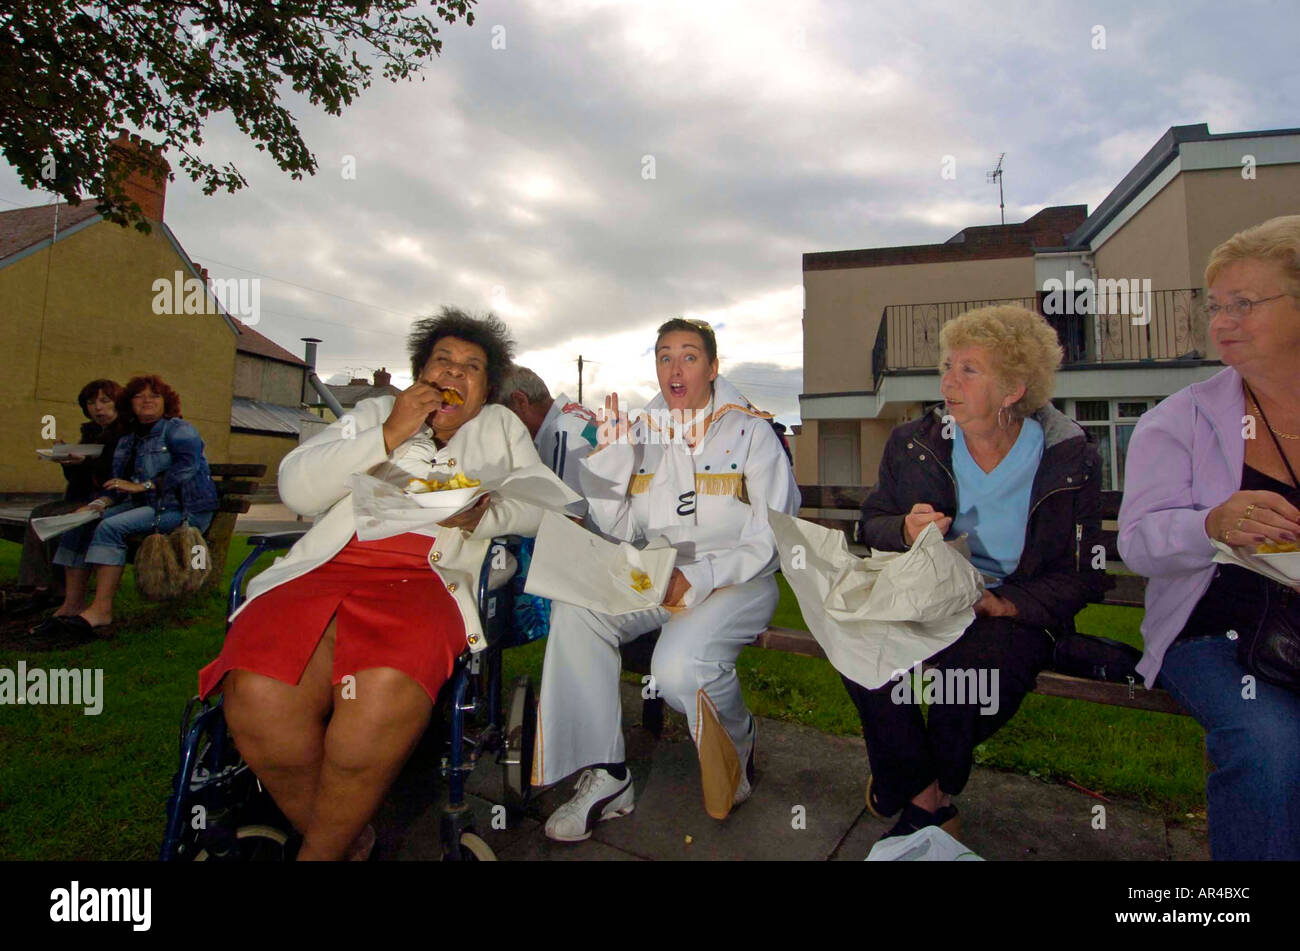 Female Elvis impersonator eating fish and chips with friends on a bench during the annual Elvis Festival in Porthcawl, UK. Stock Photo